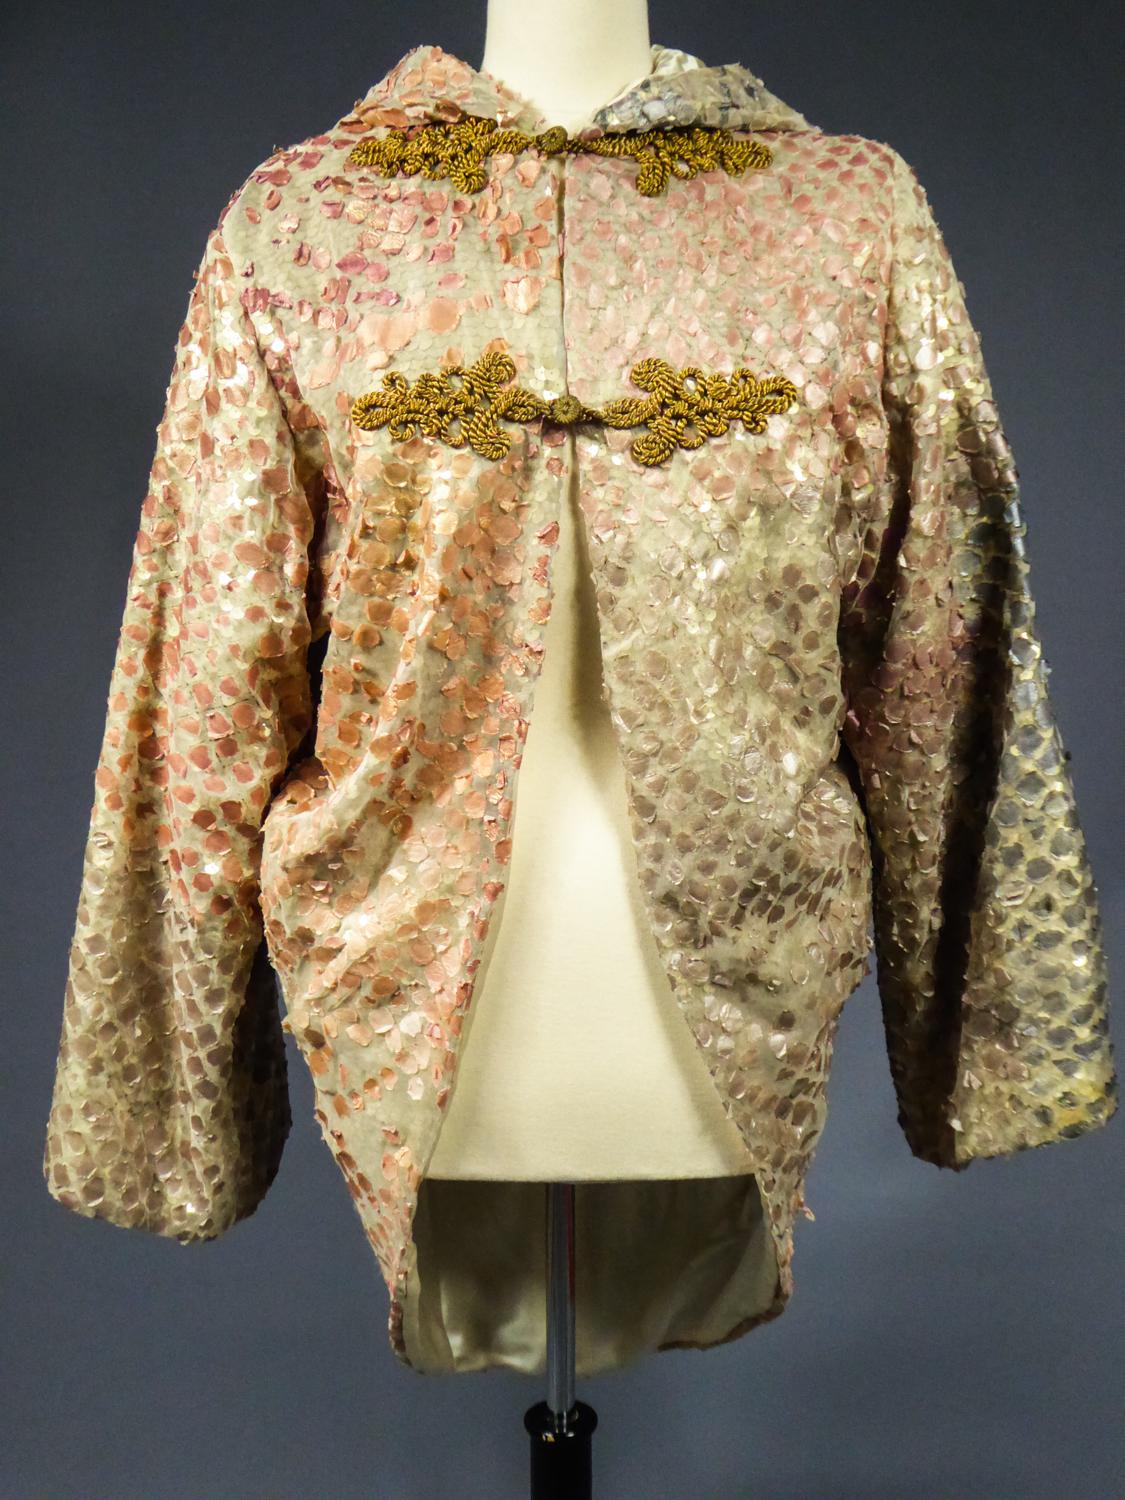 A Givenchy Couture Jacket by Alexander McQueen Numbered 86344 Circa 2000/2001 5